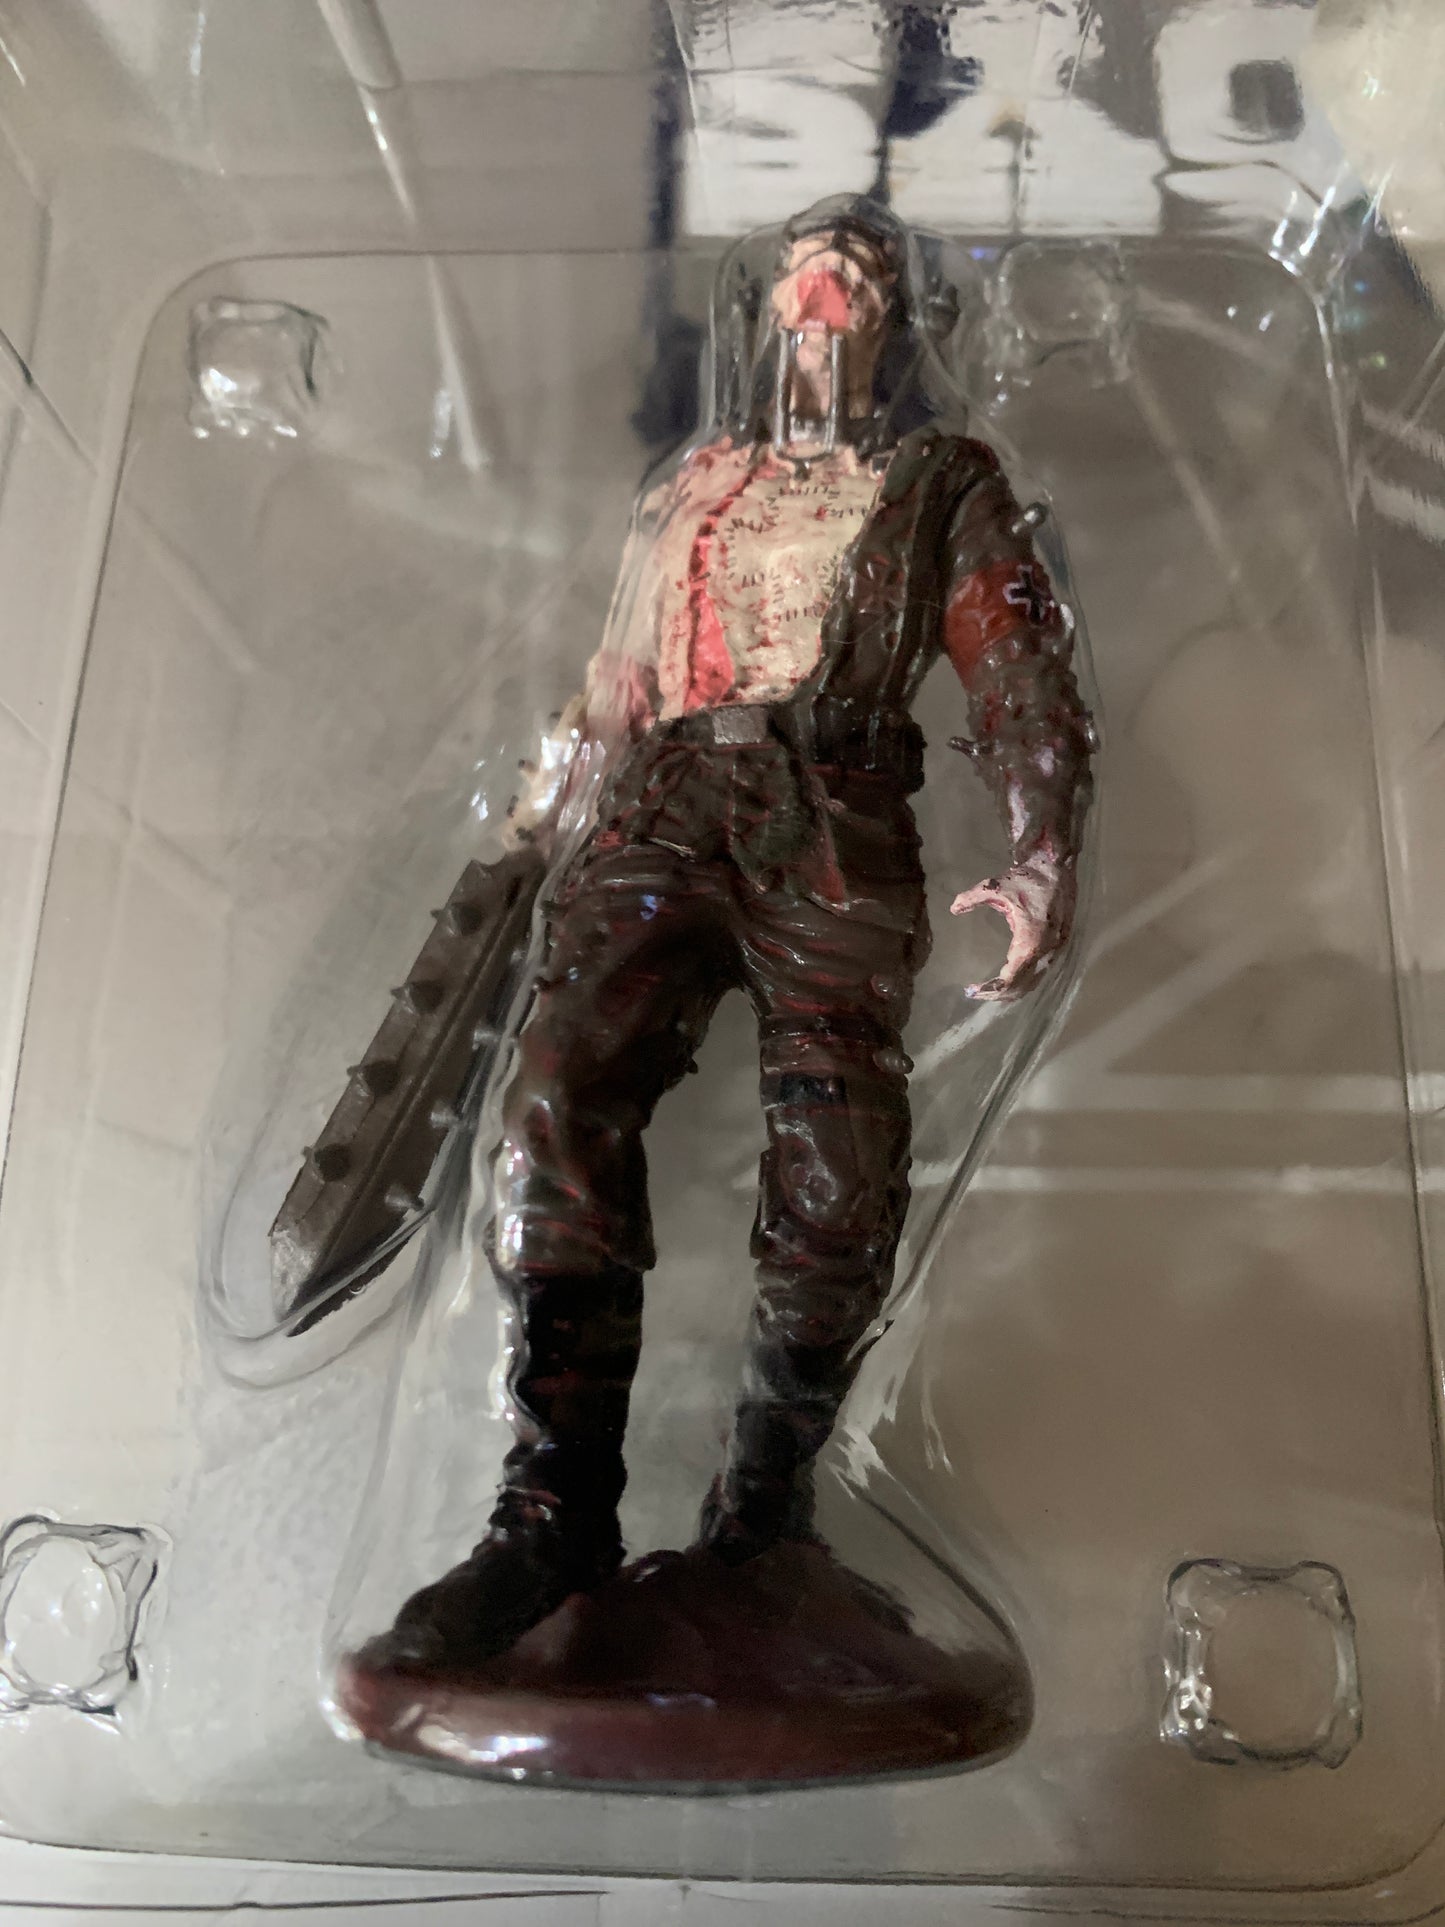 2017 Call of Duty WWII (WW2) Zombies Mode Figurine - GameStop 2017 Activision